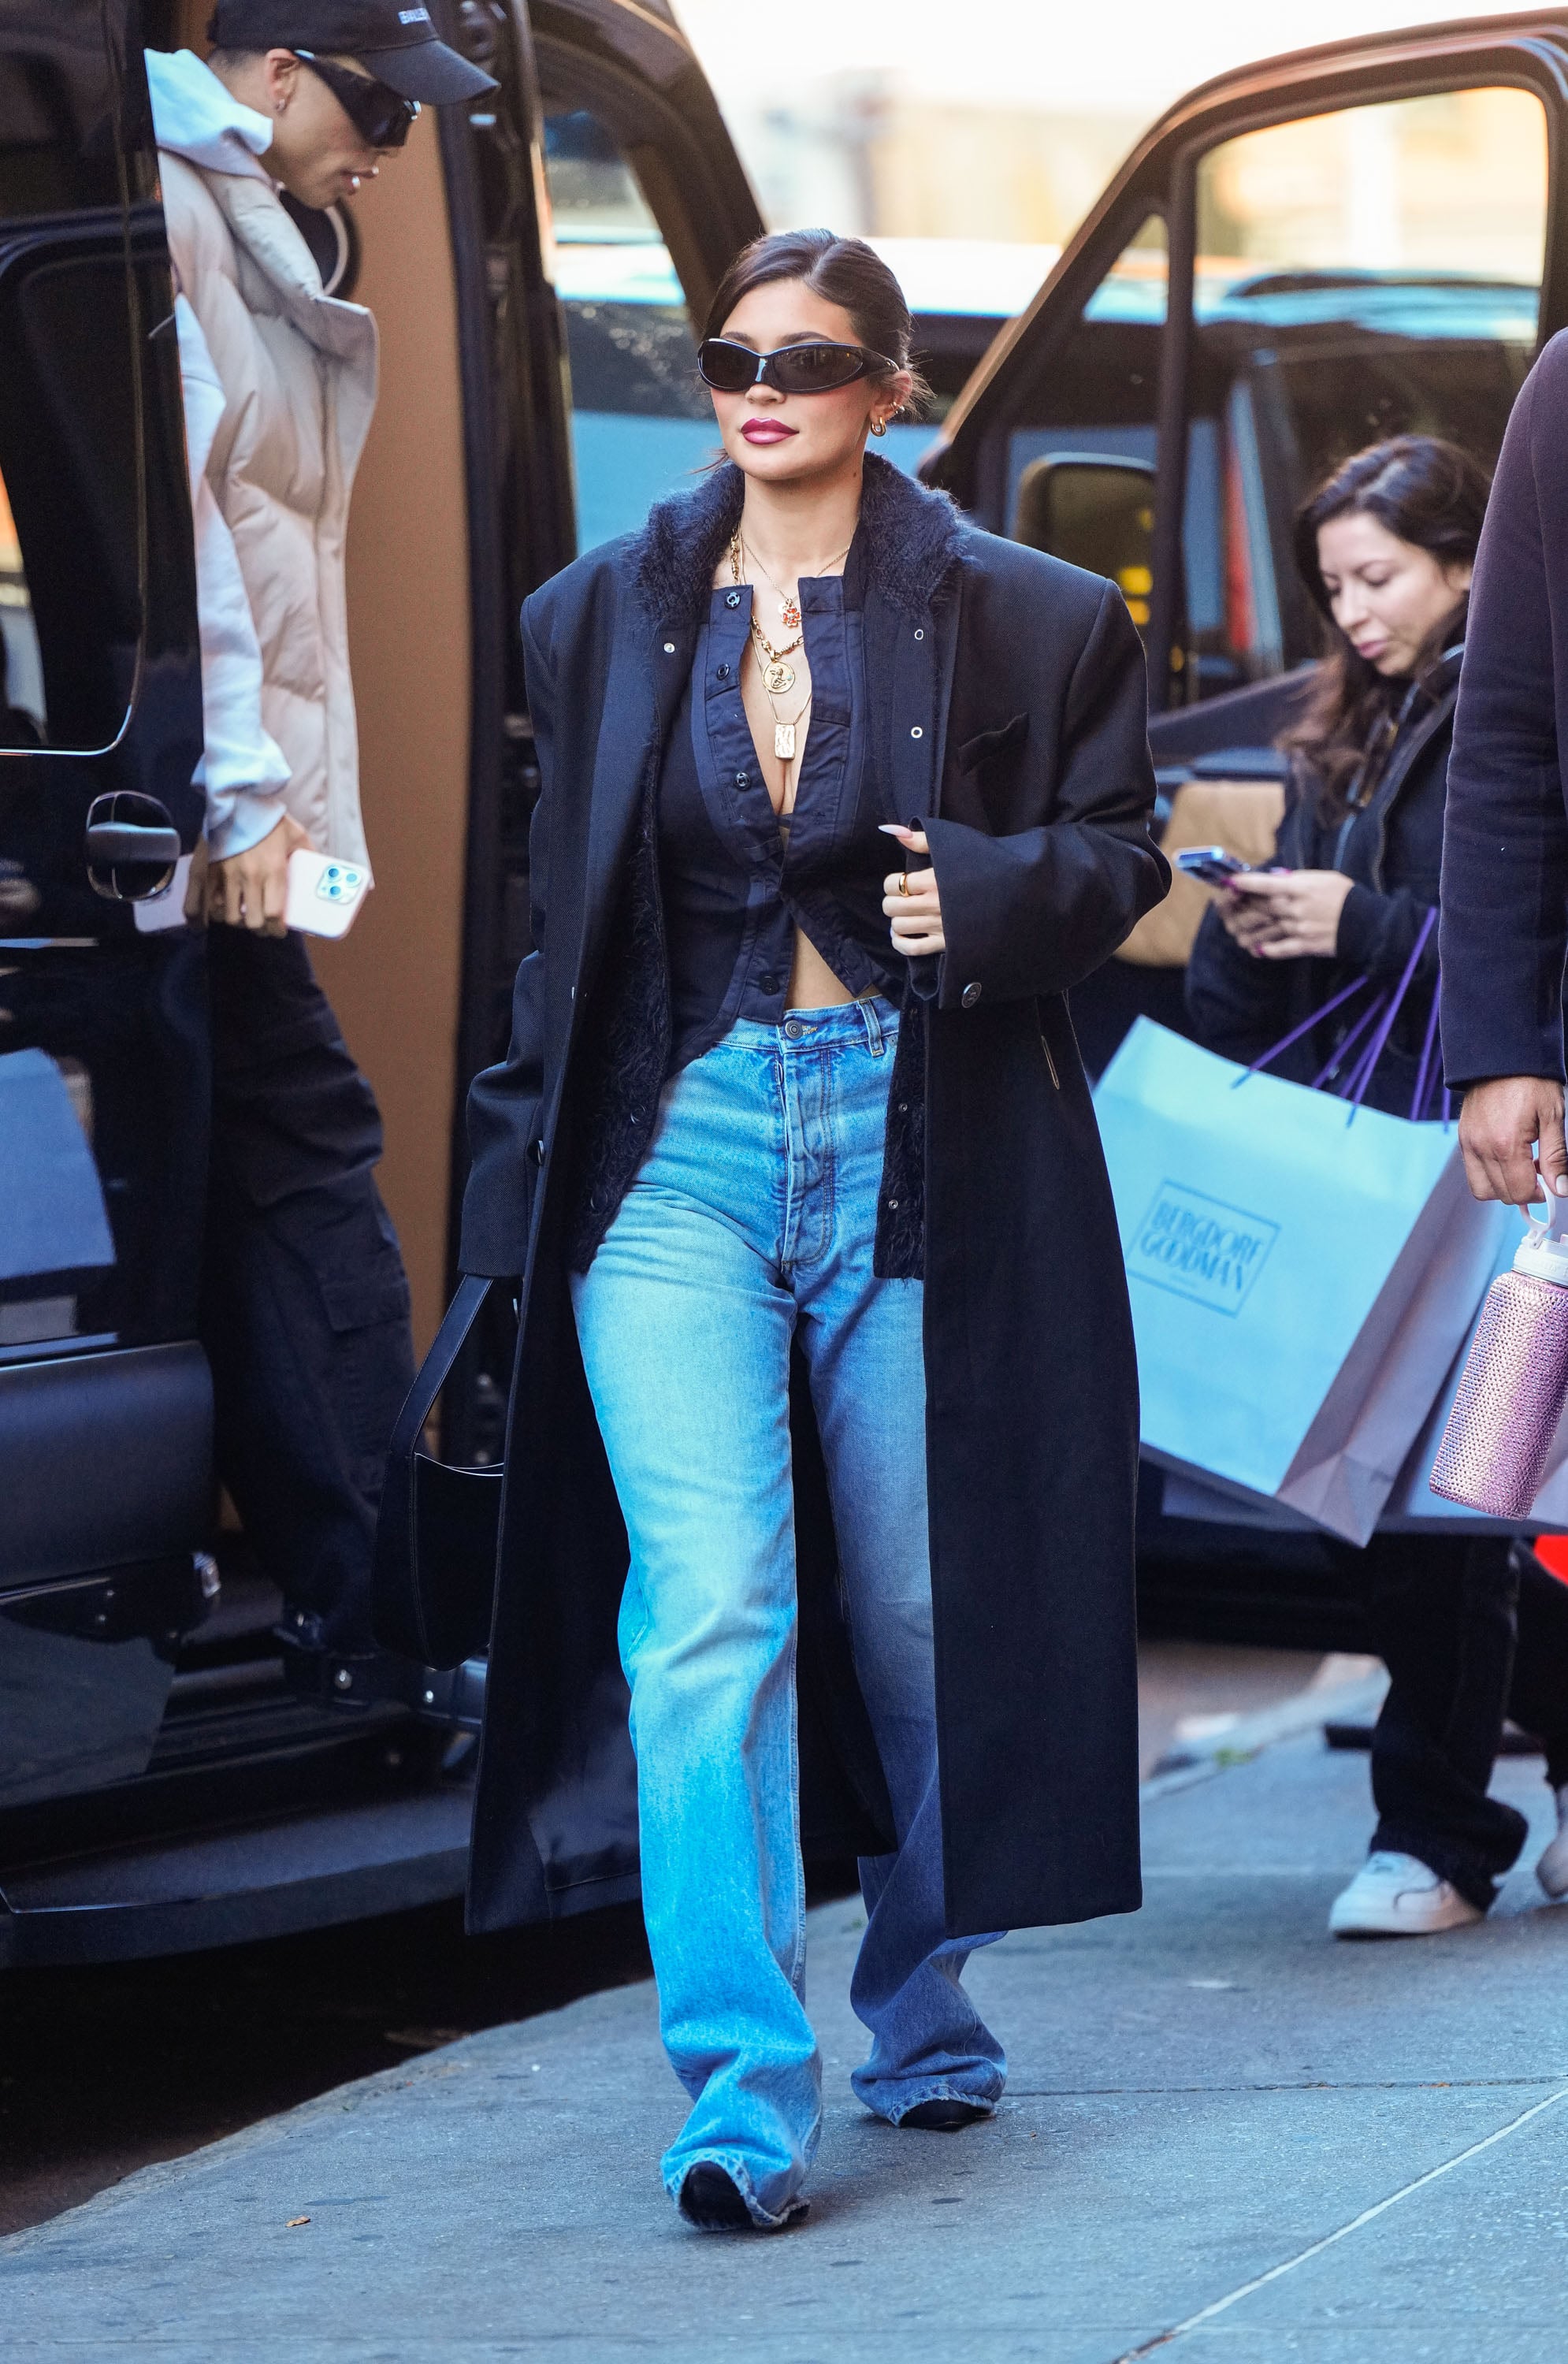 Kylie Jenner Gives Casual Chic Clothing A Whole New Stylish Meaning